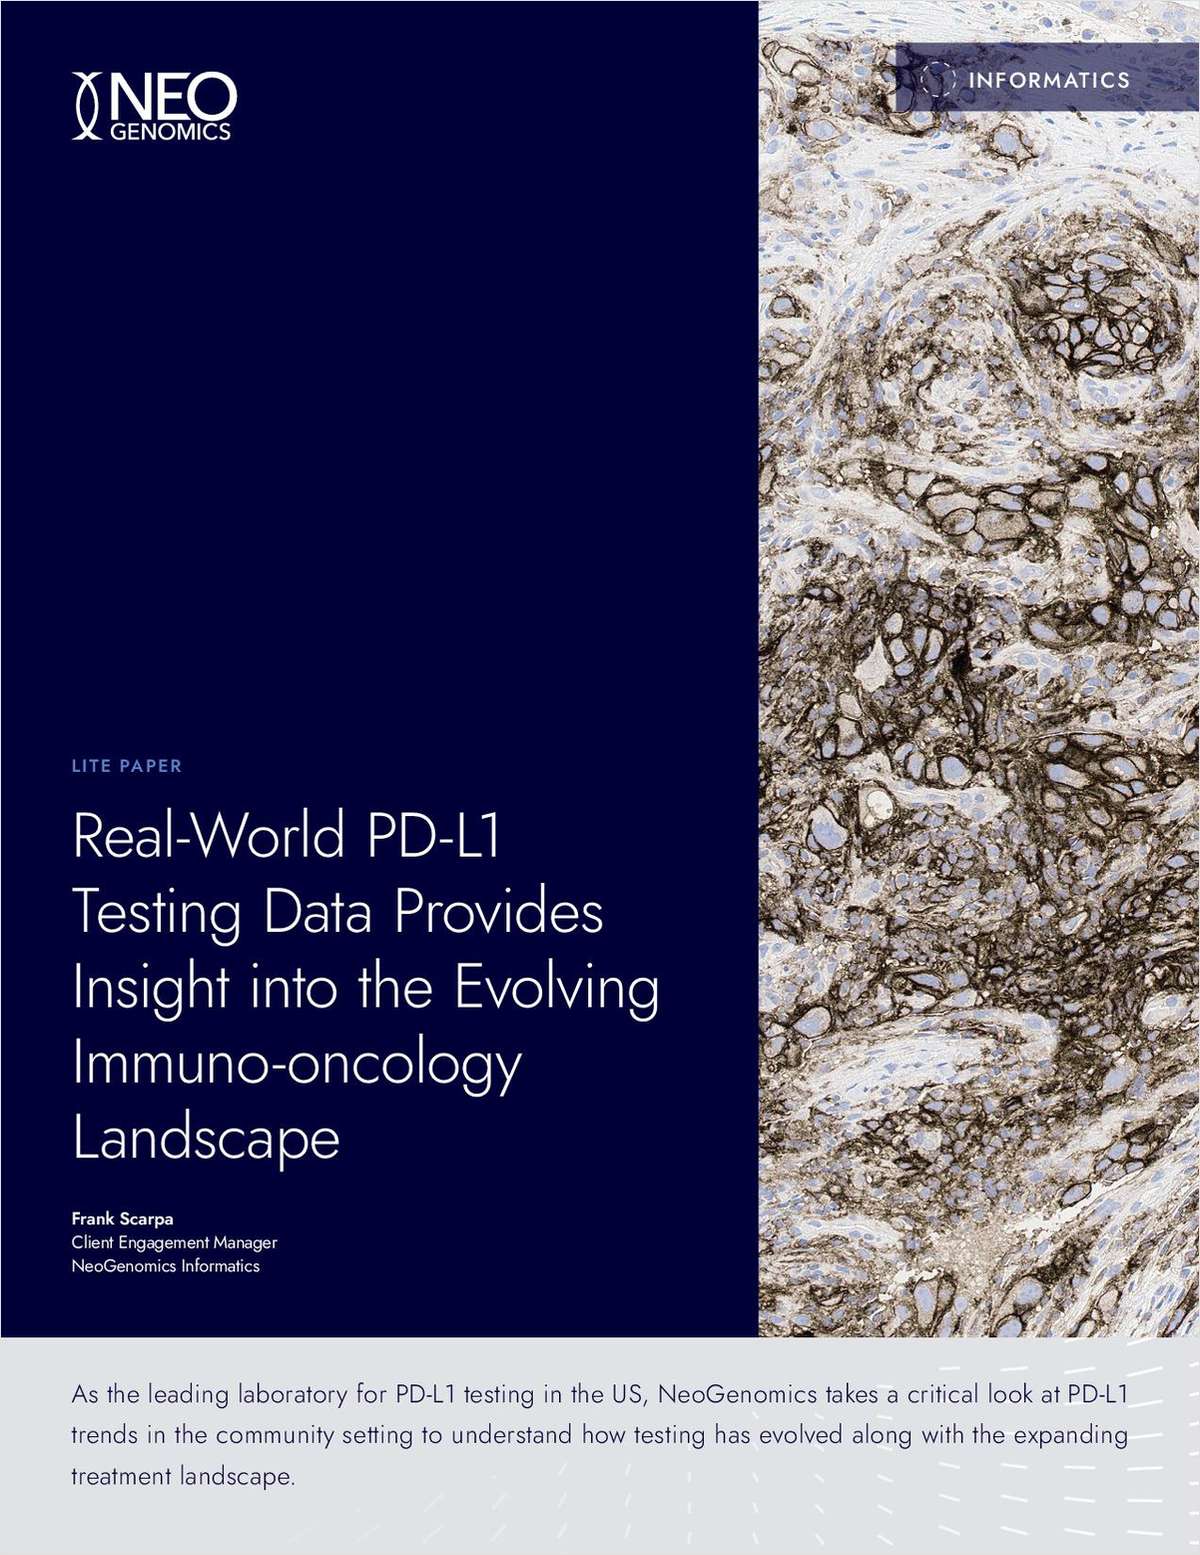 Real-World PD-L1 Testing Data Provides Insight into the Evolving Immuno-oncology Landscape